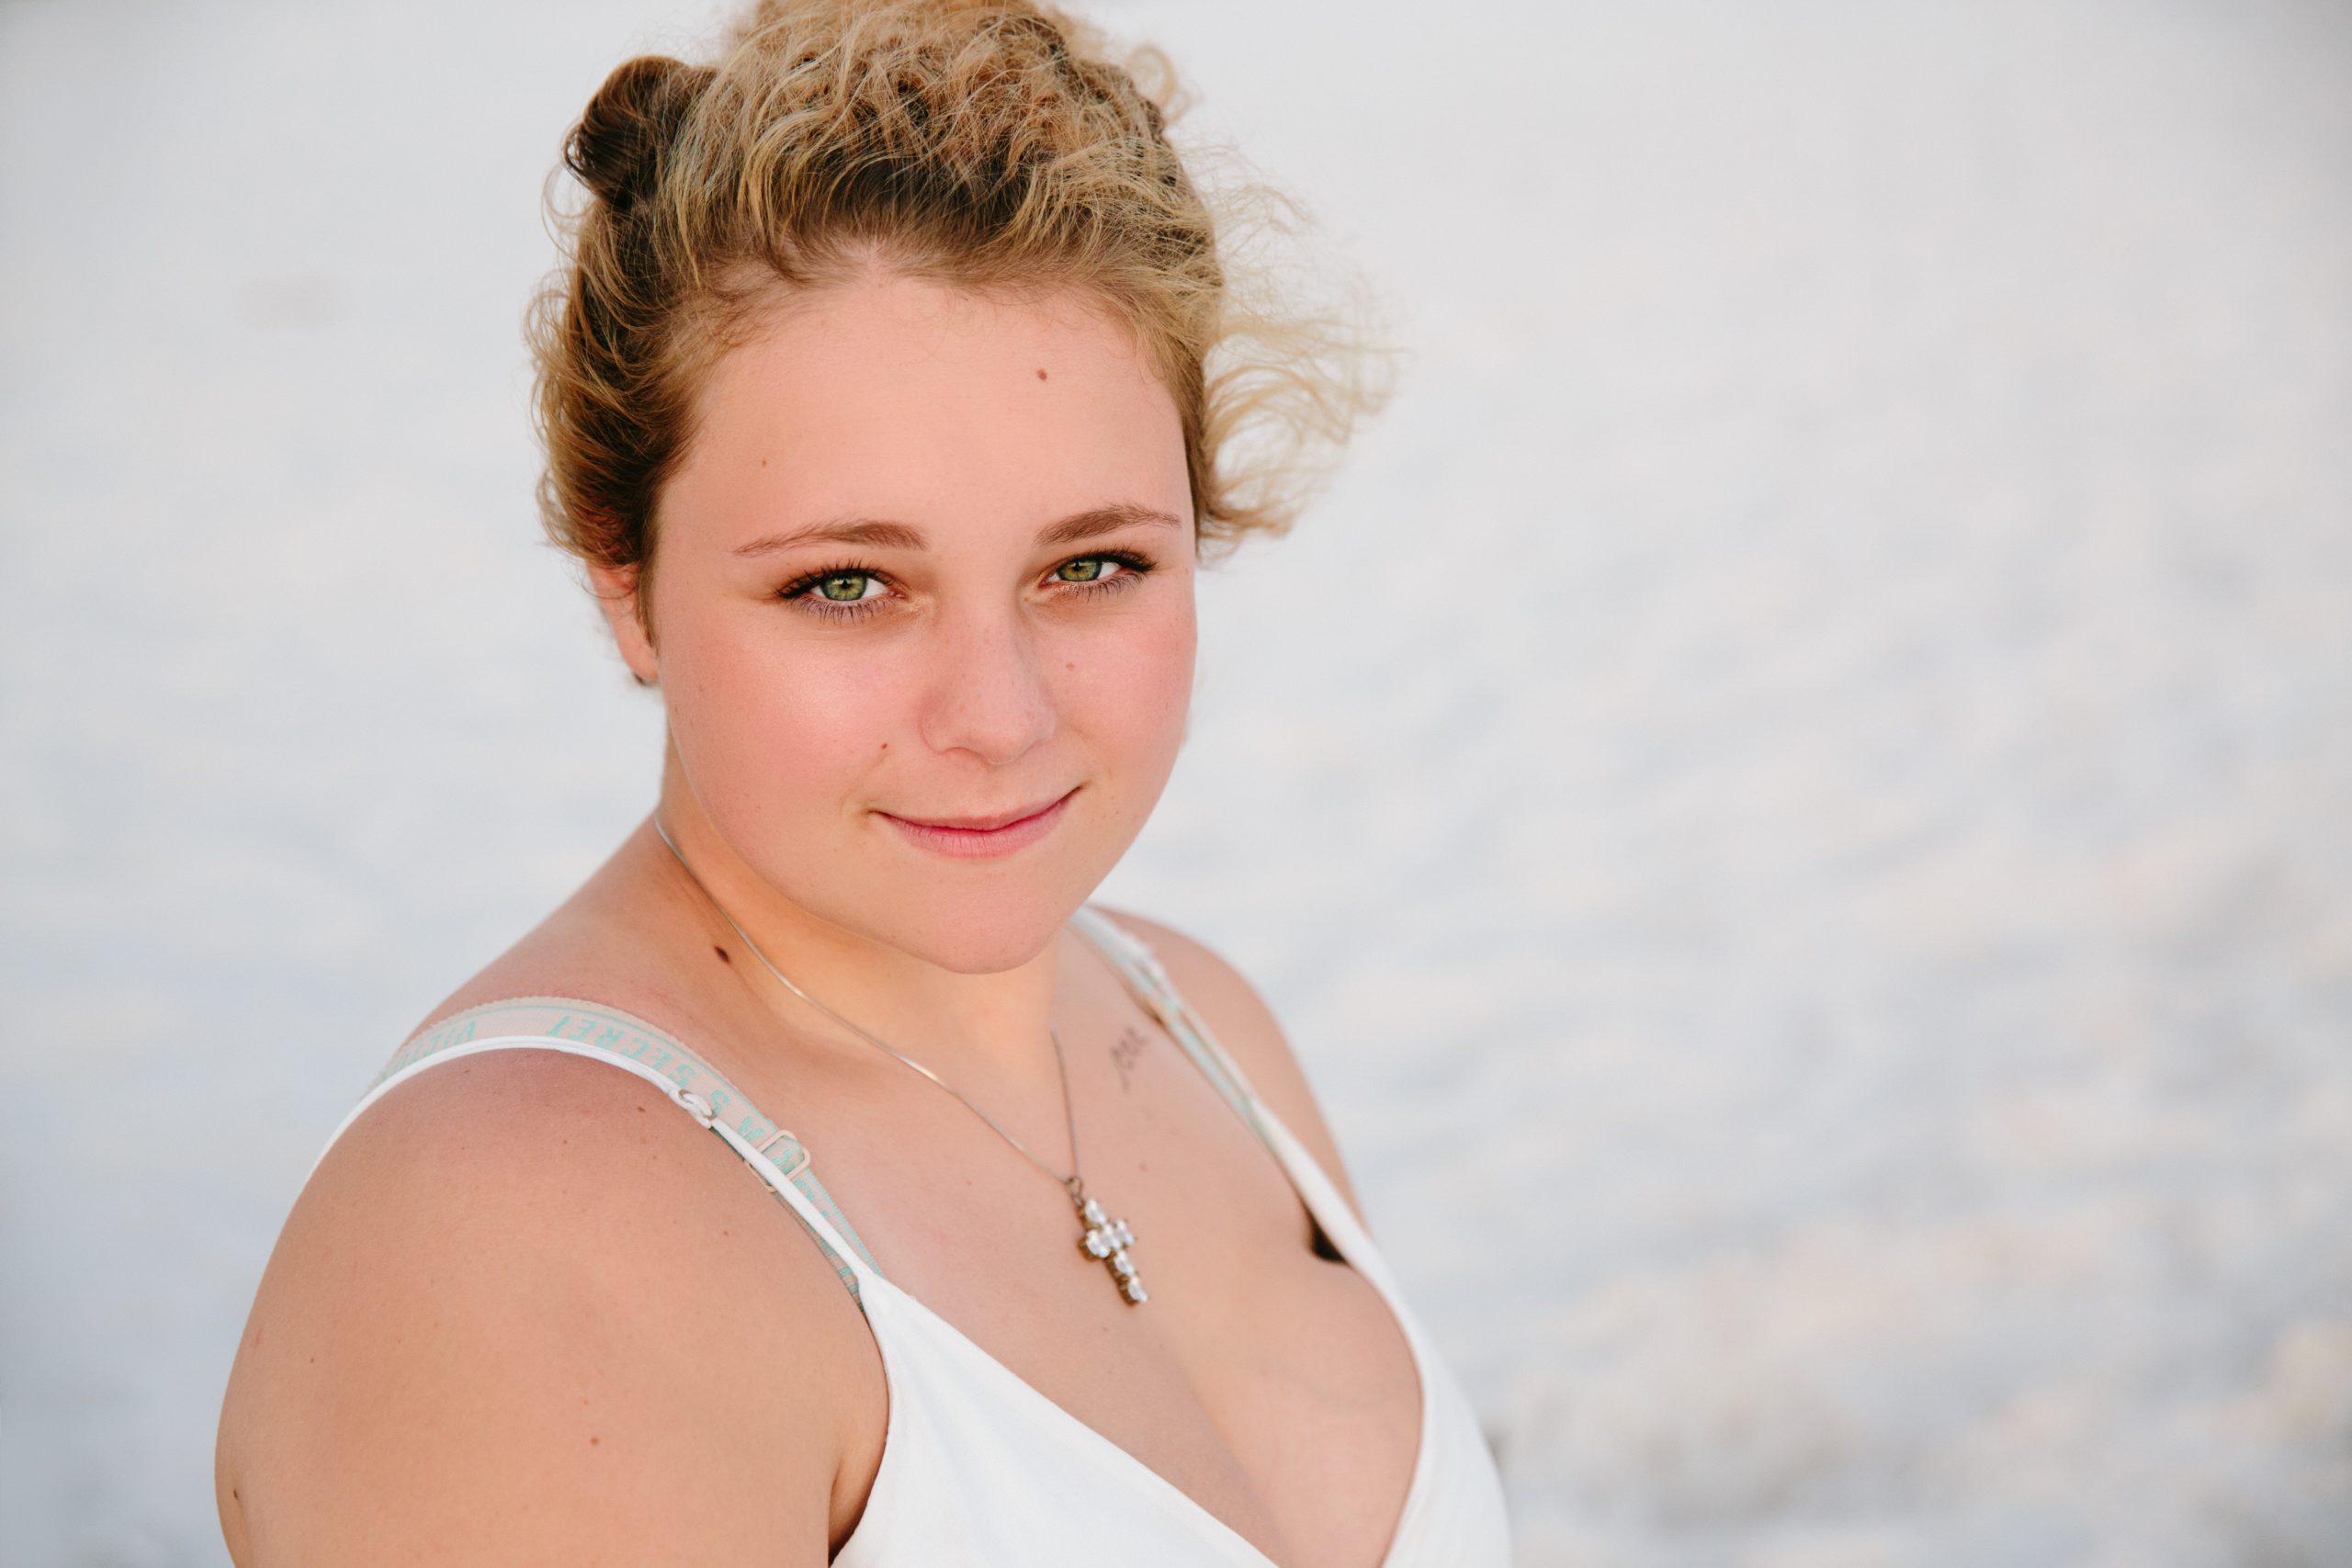 Beautiful high school senior girl with curly hair smiling on the beach